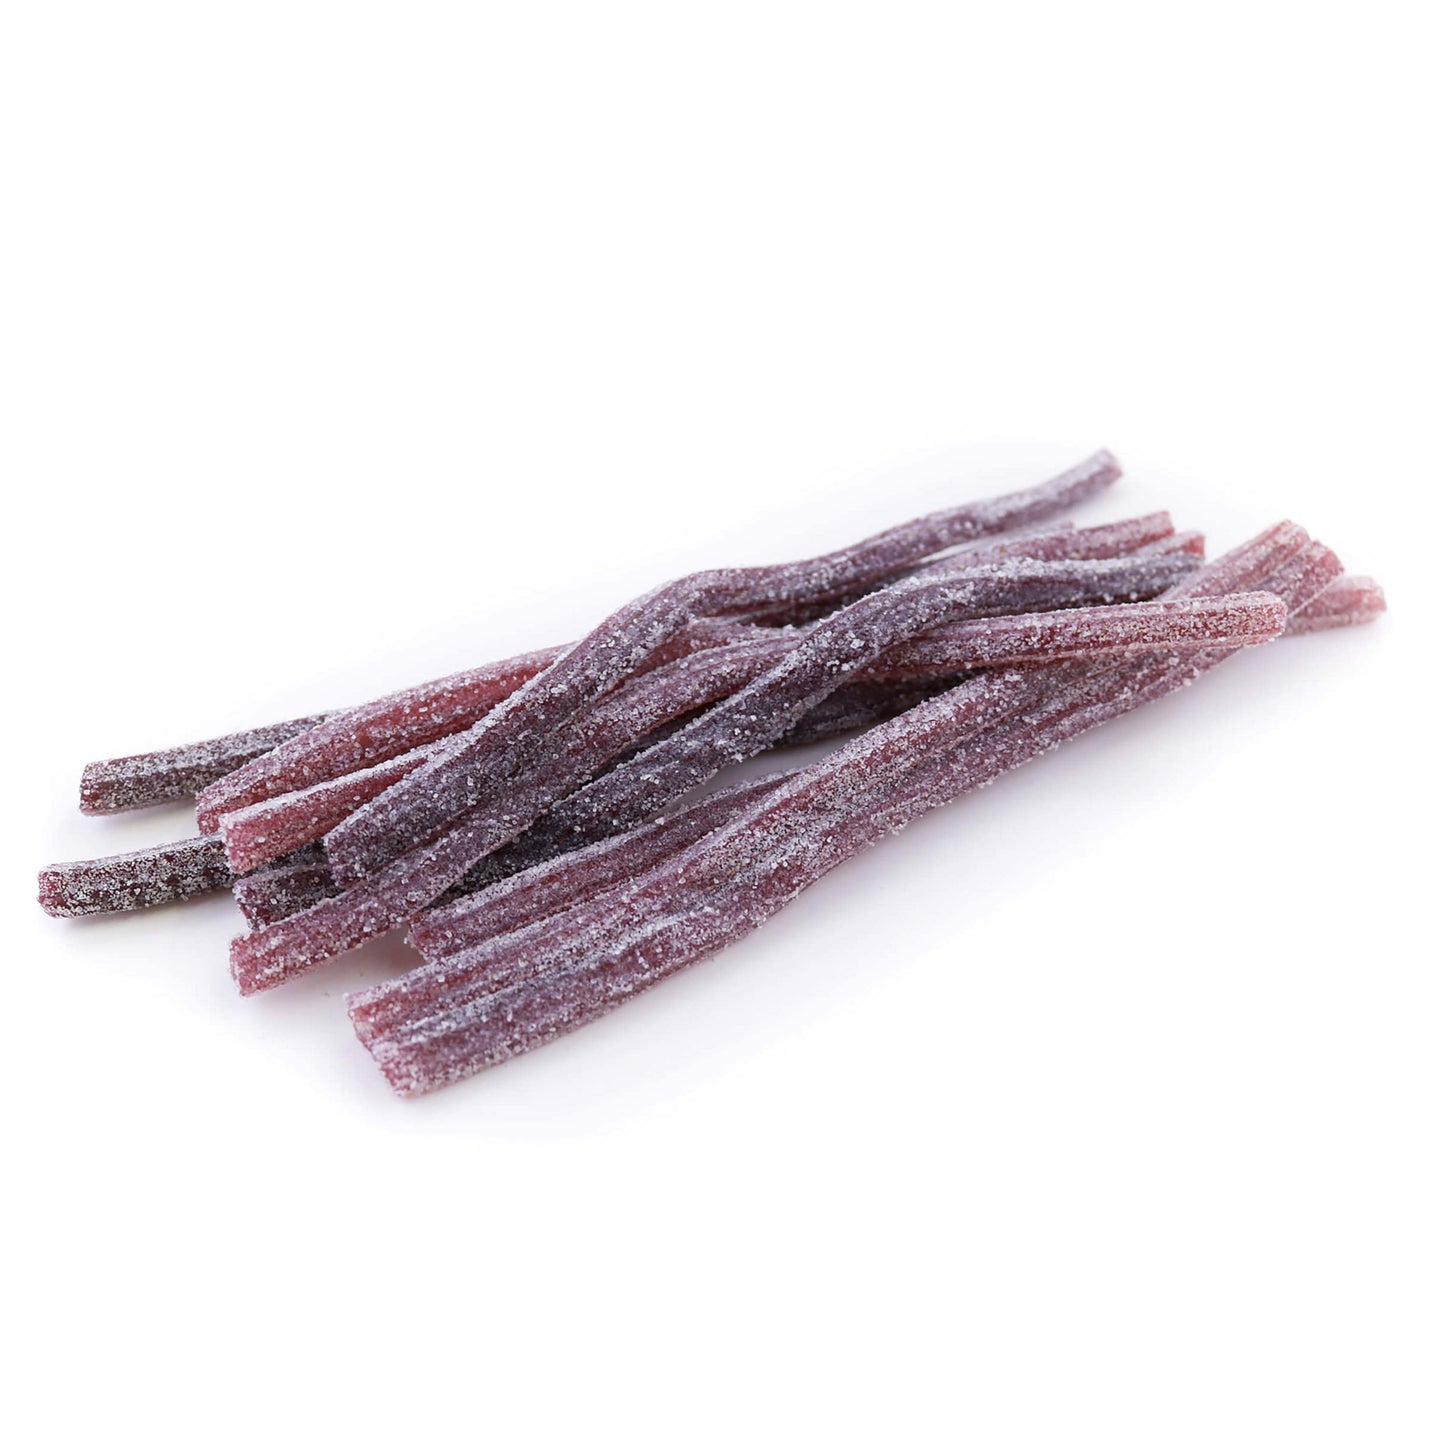 Sour Punch Grape Straws sugar coated candy in a pile